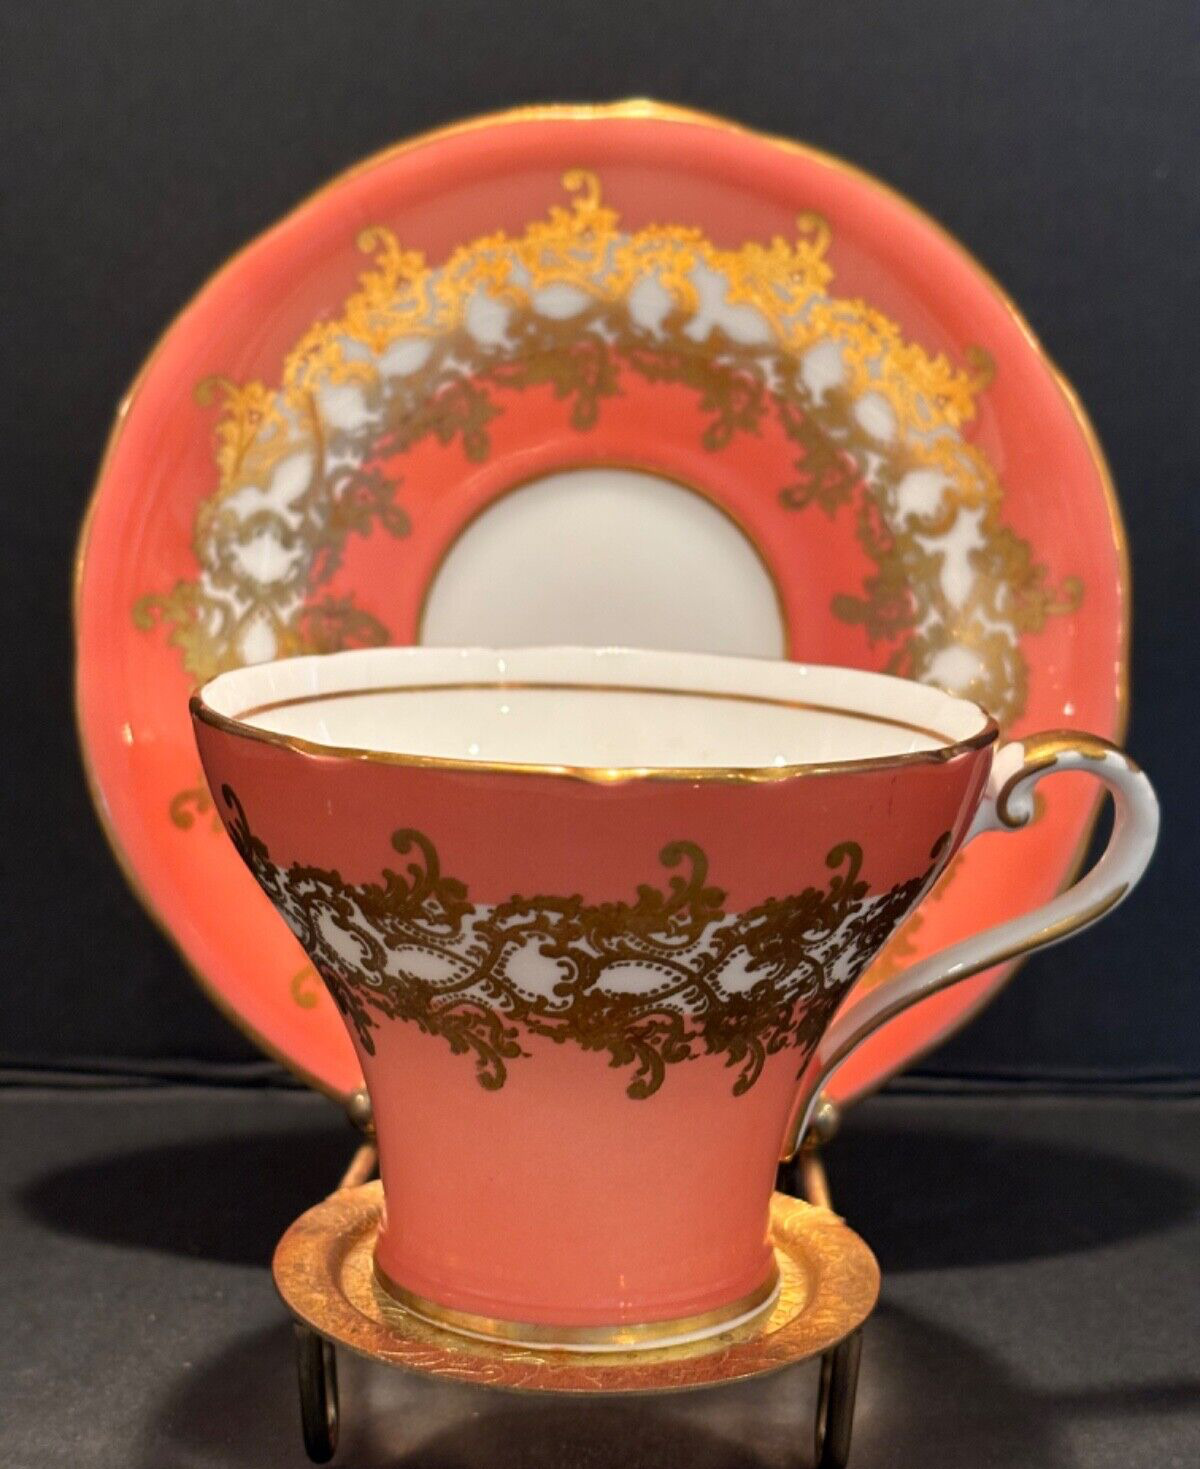 Vintage Aynsley Coral Orange Tea Cup and Saucer With Gold Pat 1215 England